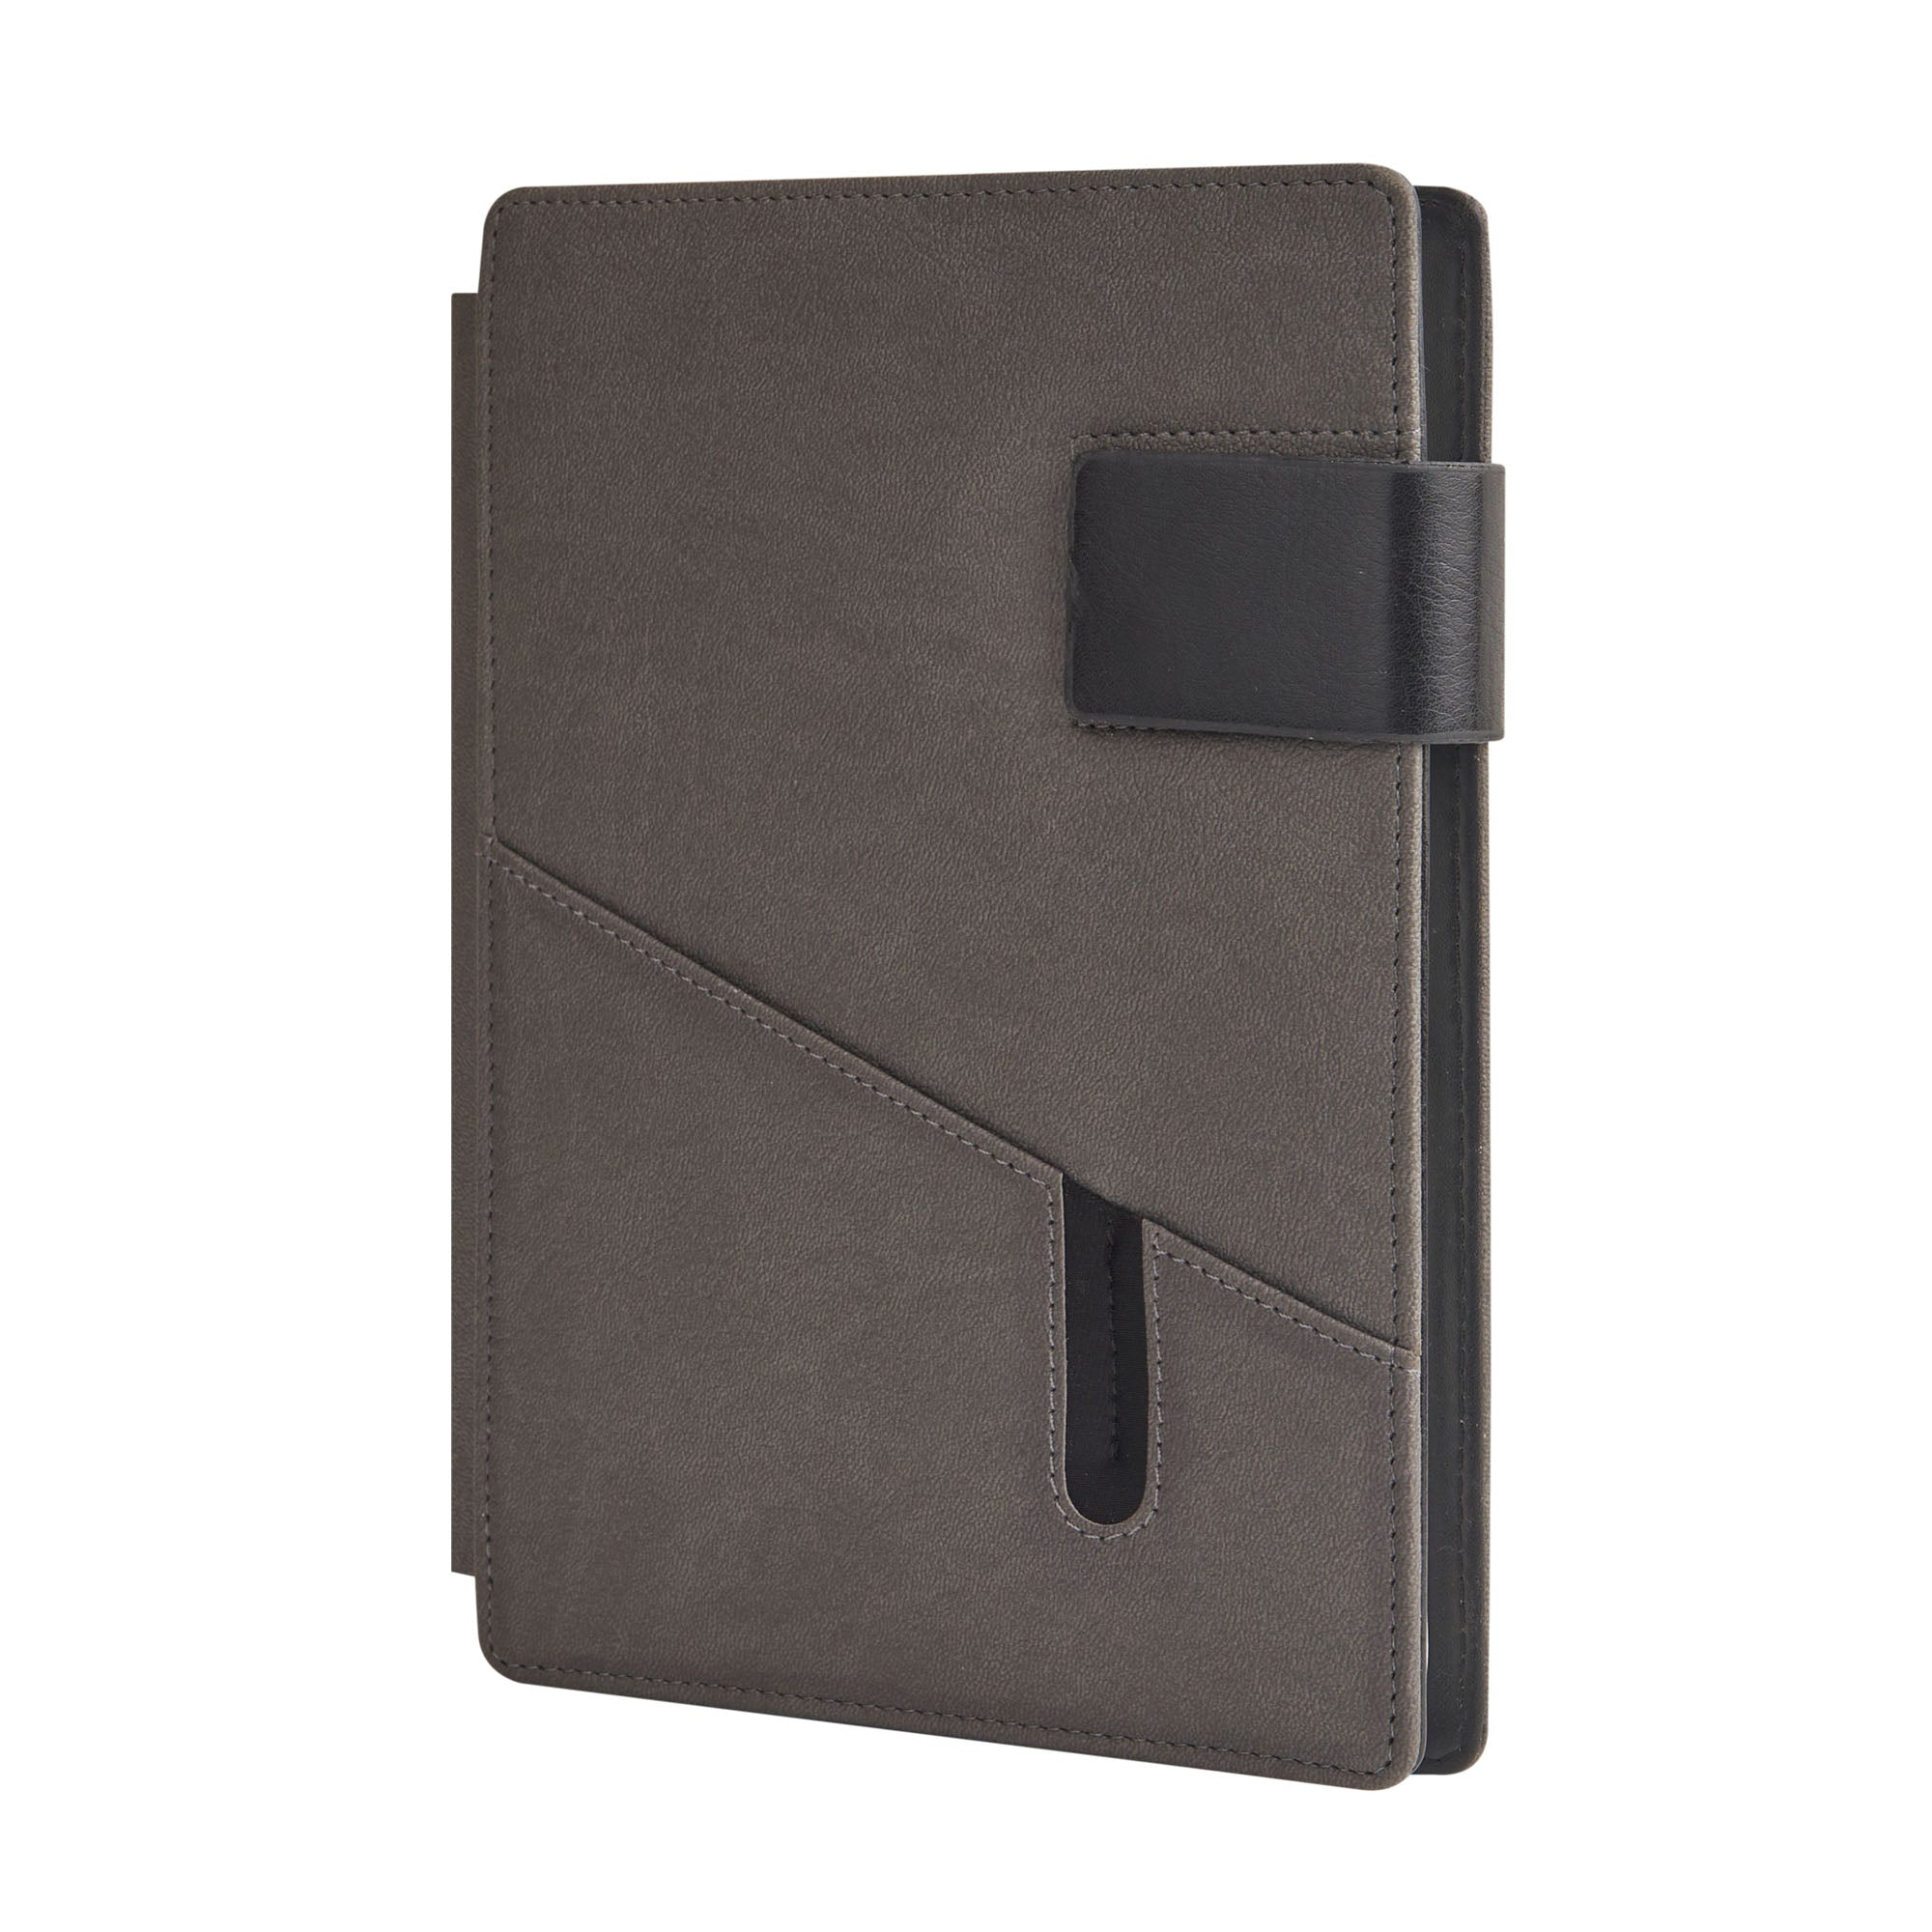 Personalized Primo Refillable Slip Jacket Organizer with A5 Notebook - Grey+Black